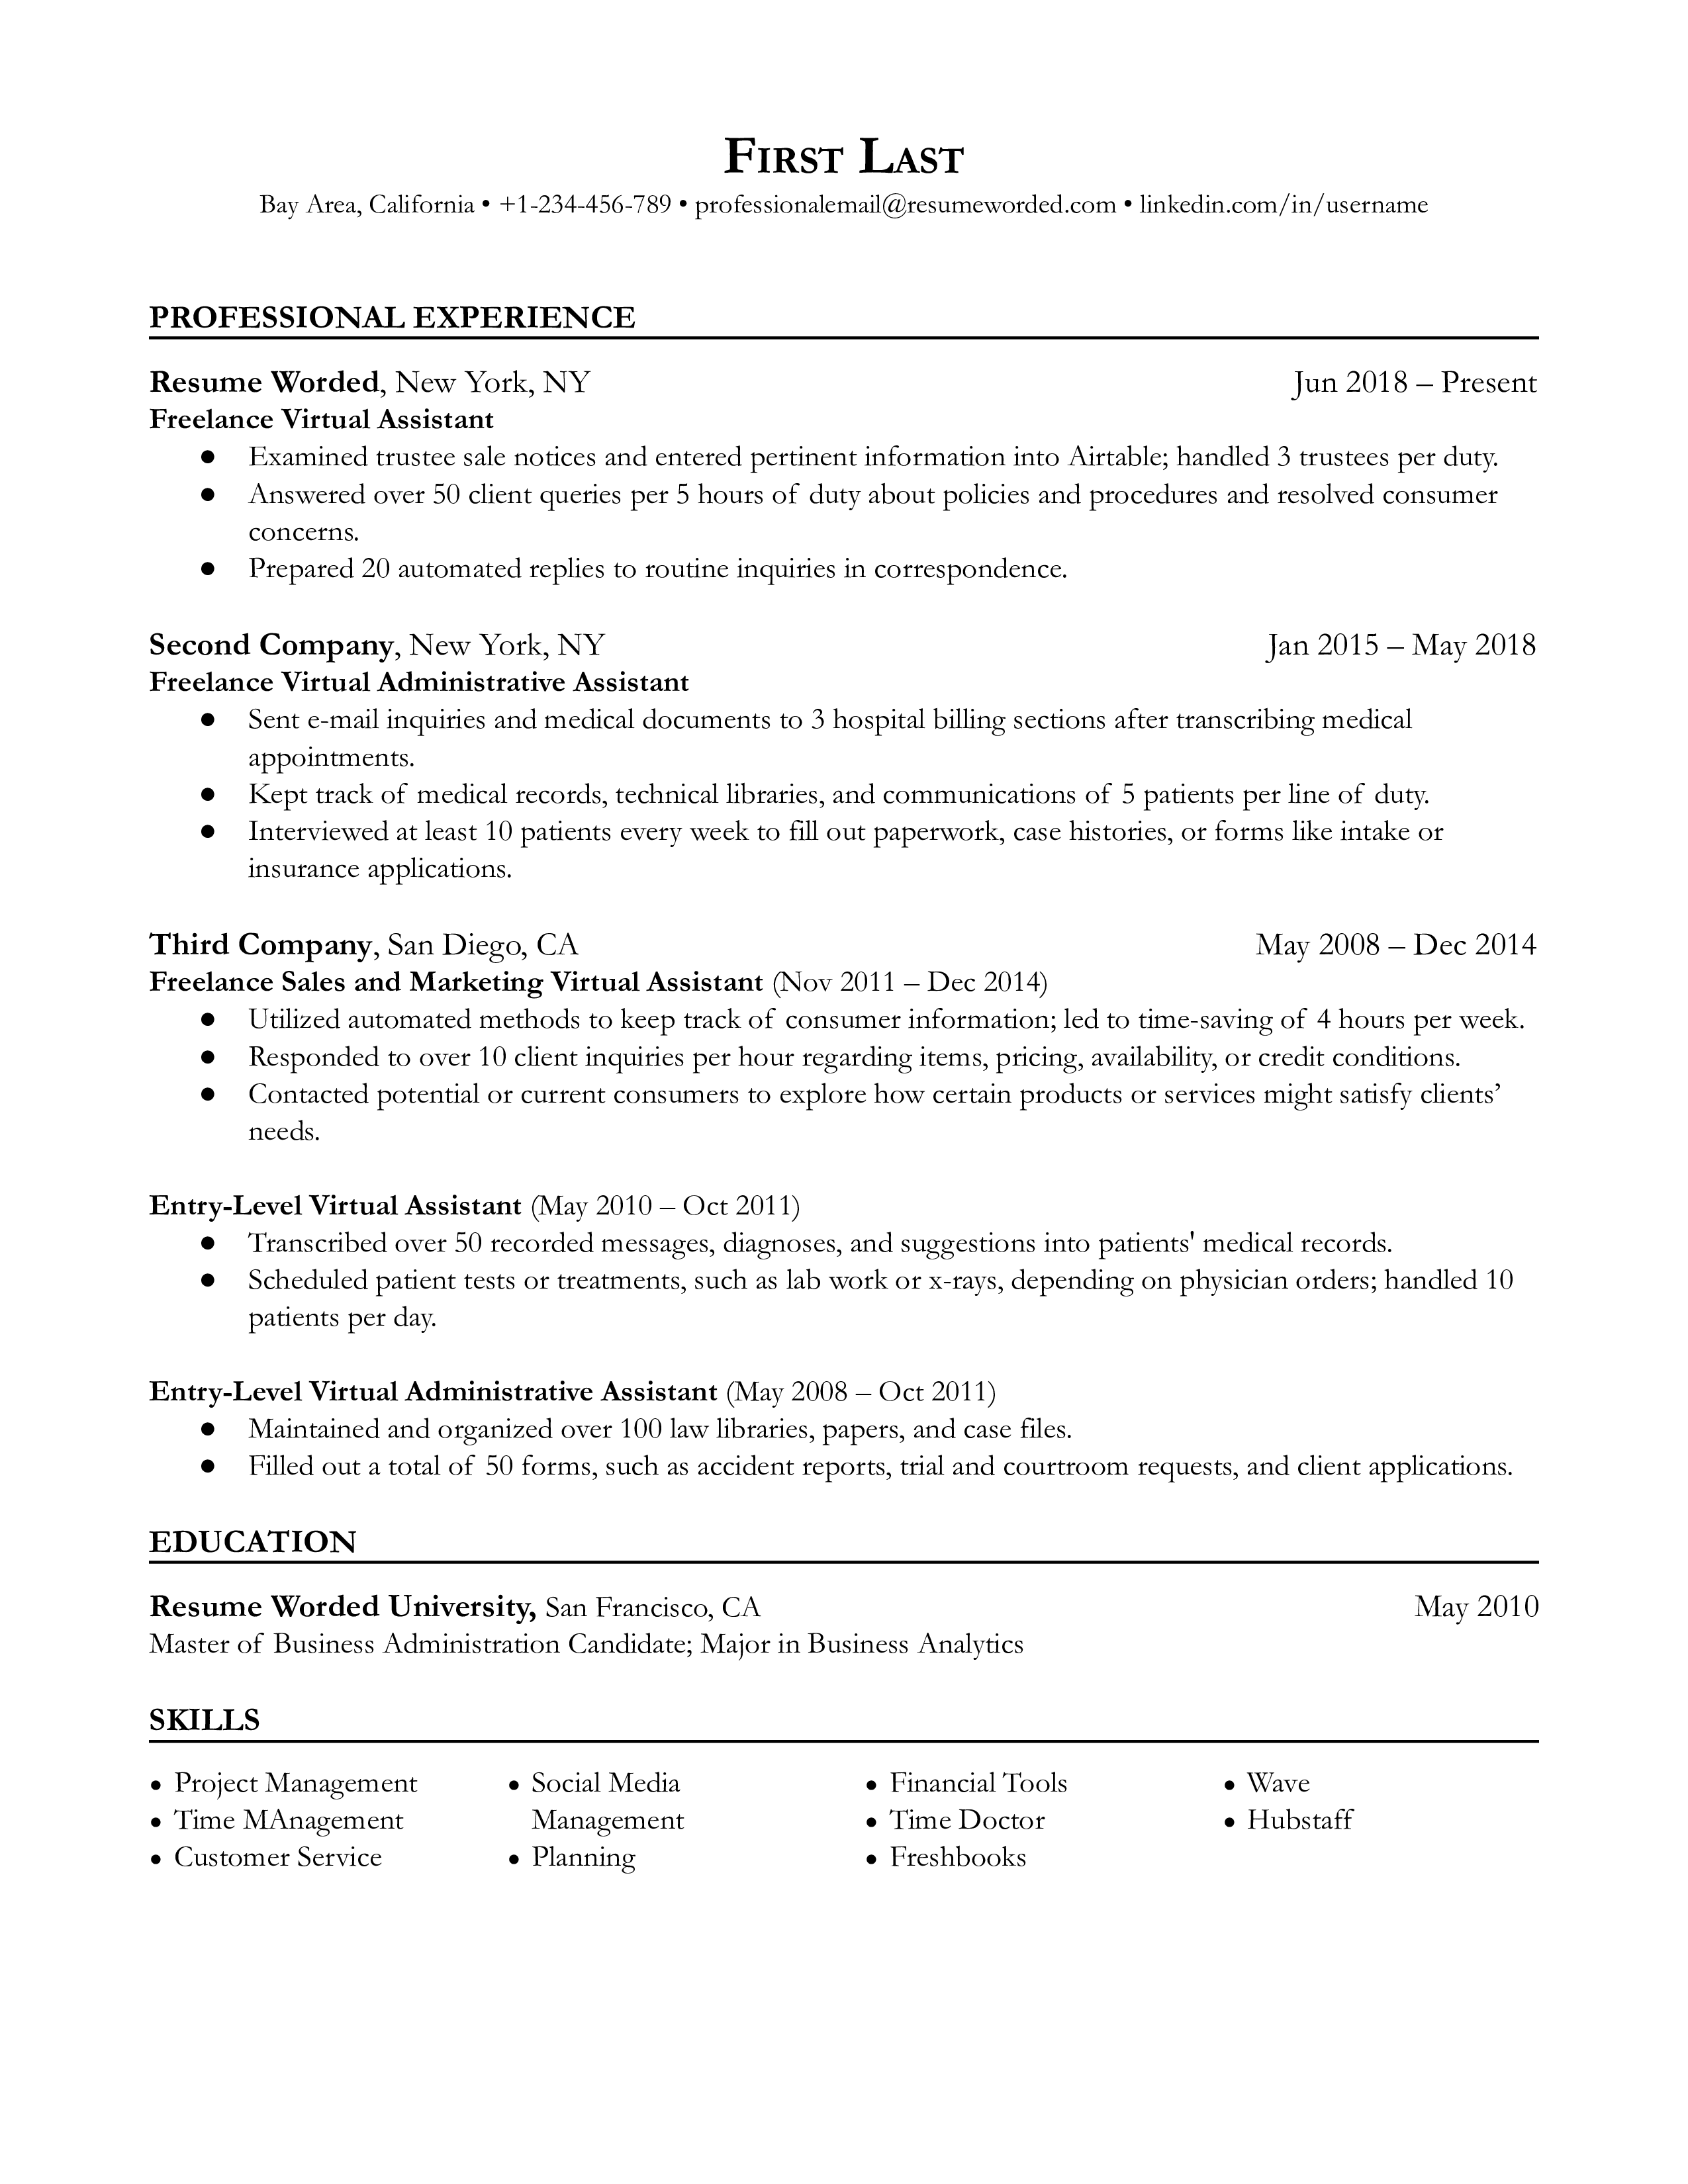 A successful freelance virtual assistant resume that highlights the applicant's  skills and tasks range.